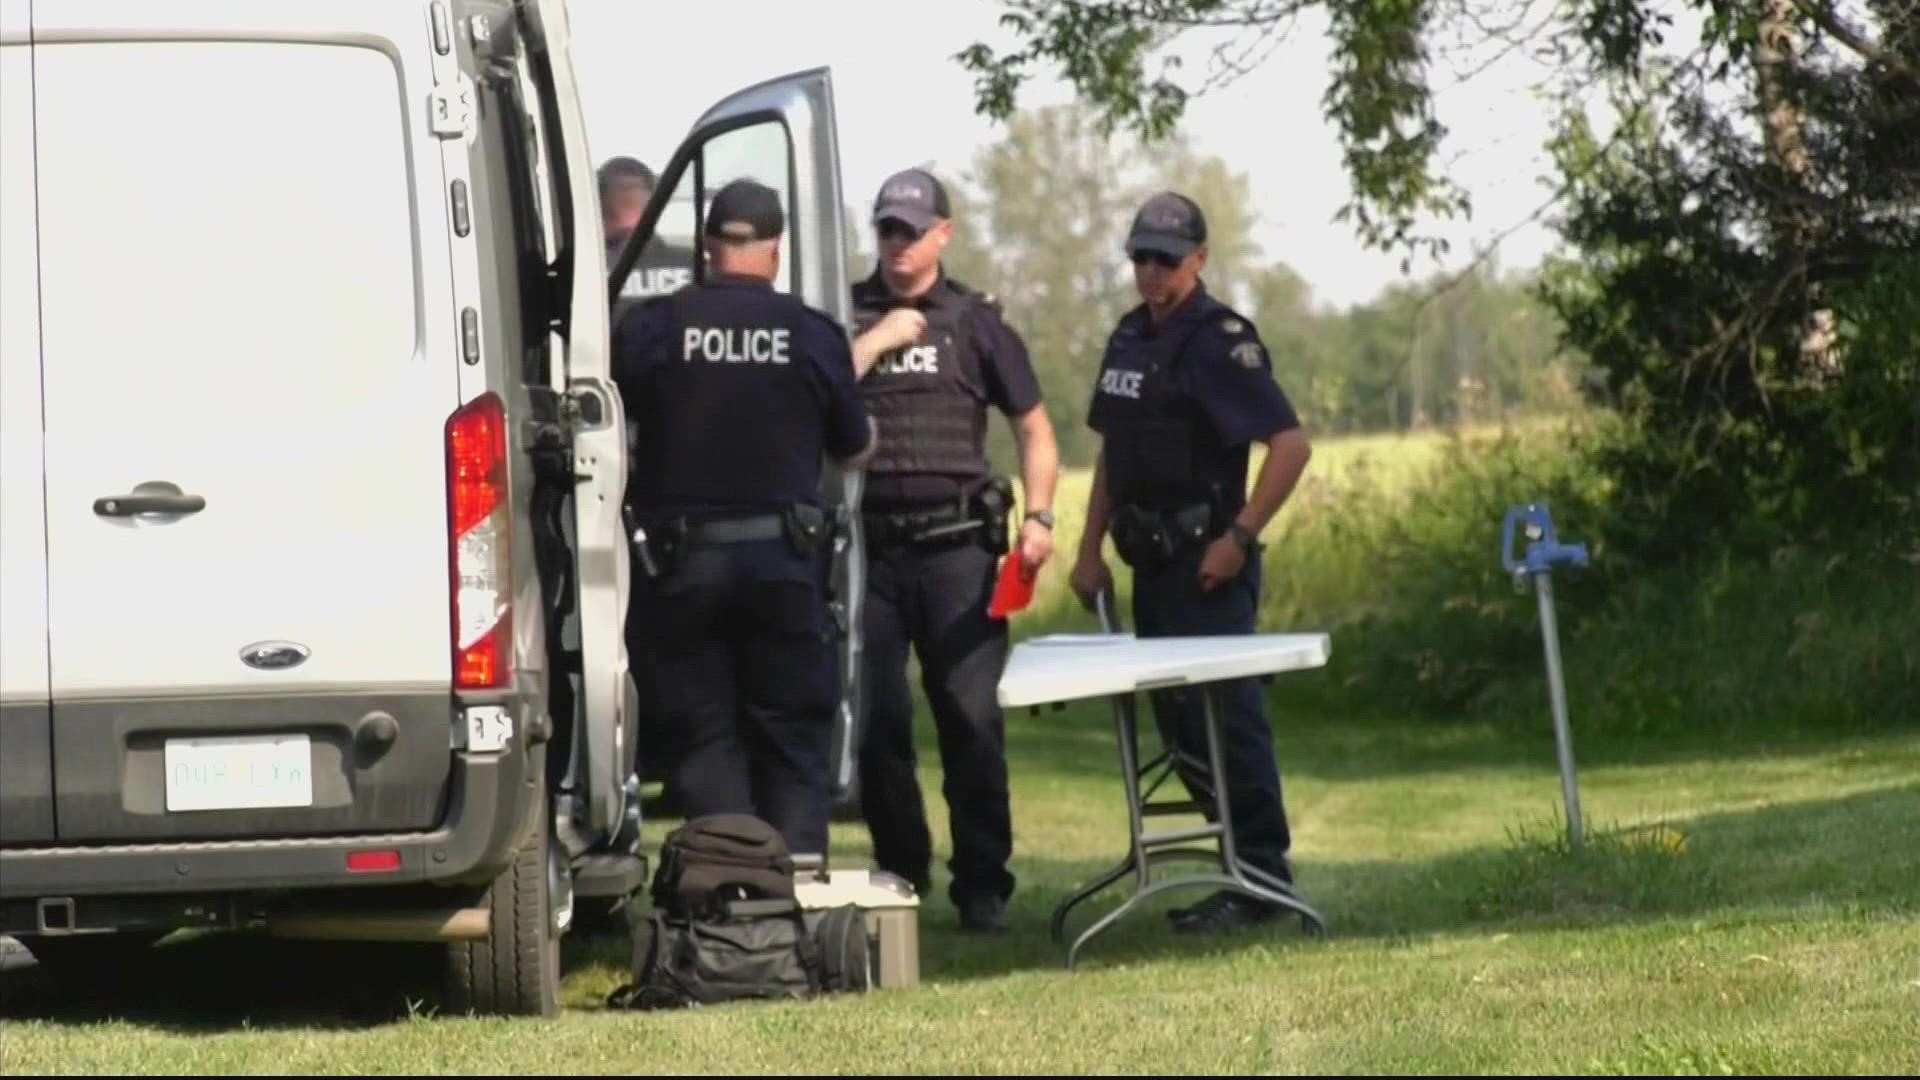 Police in Canada are searching for two suspects in the violence that left 10 people dead.